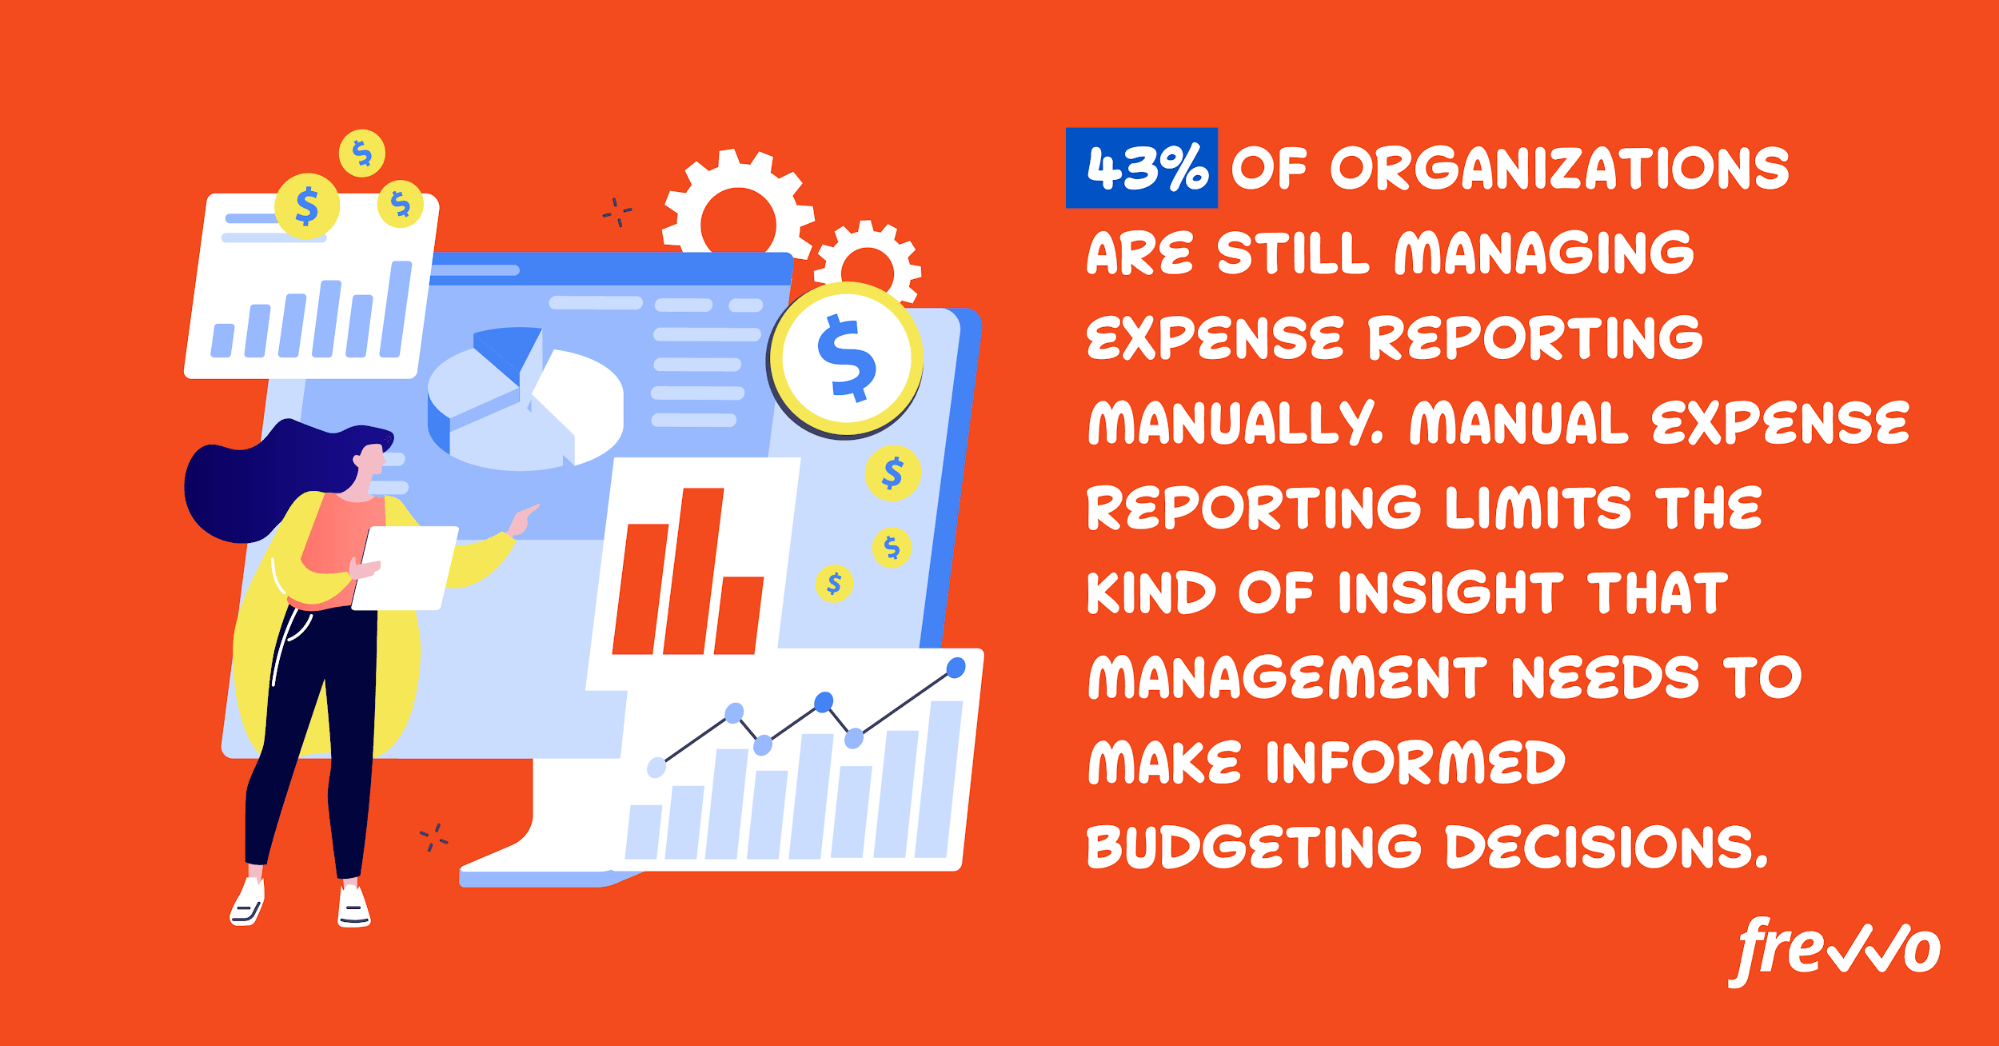 43% of organizations still manage expense reporting manually